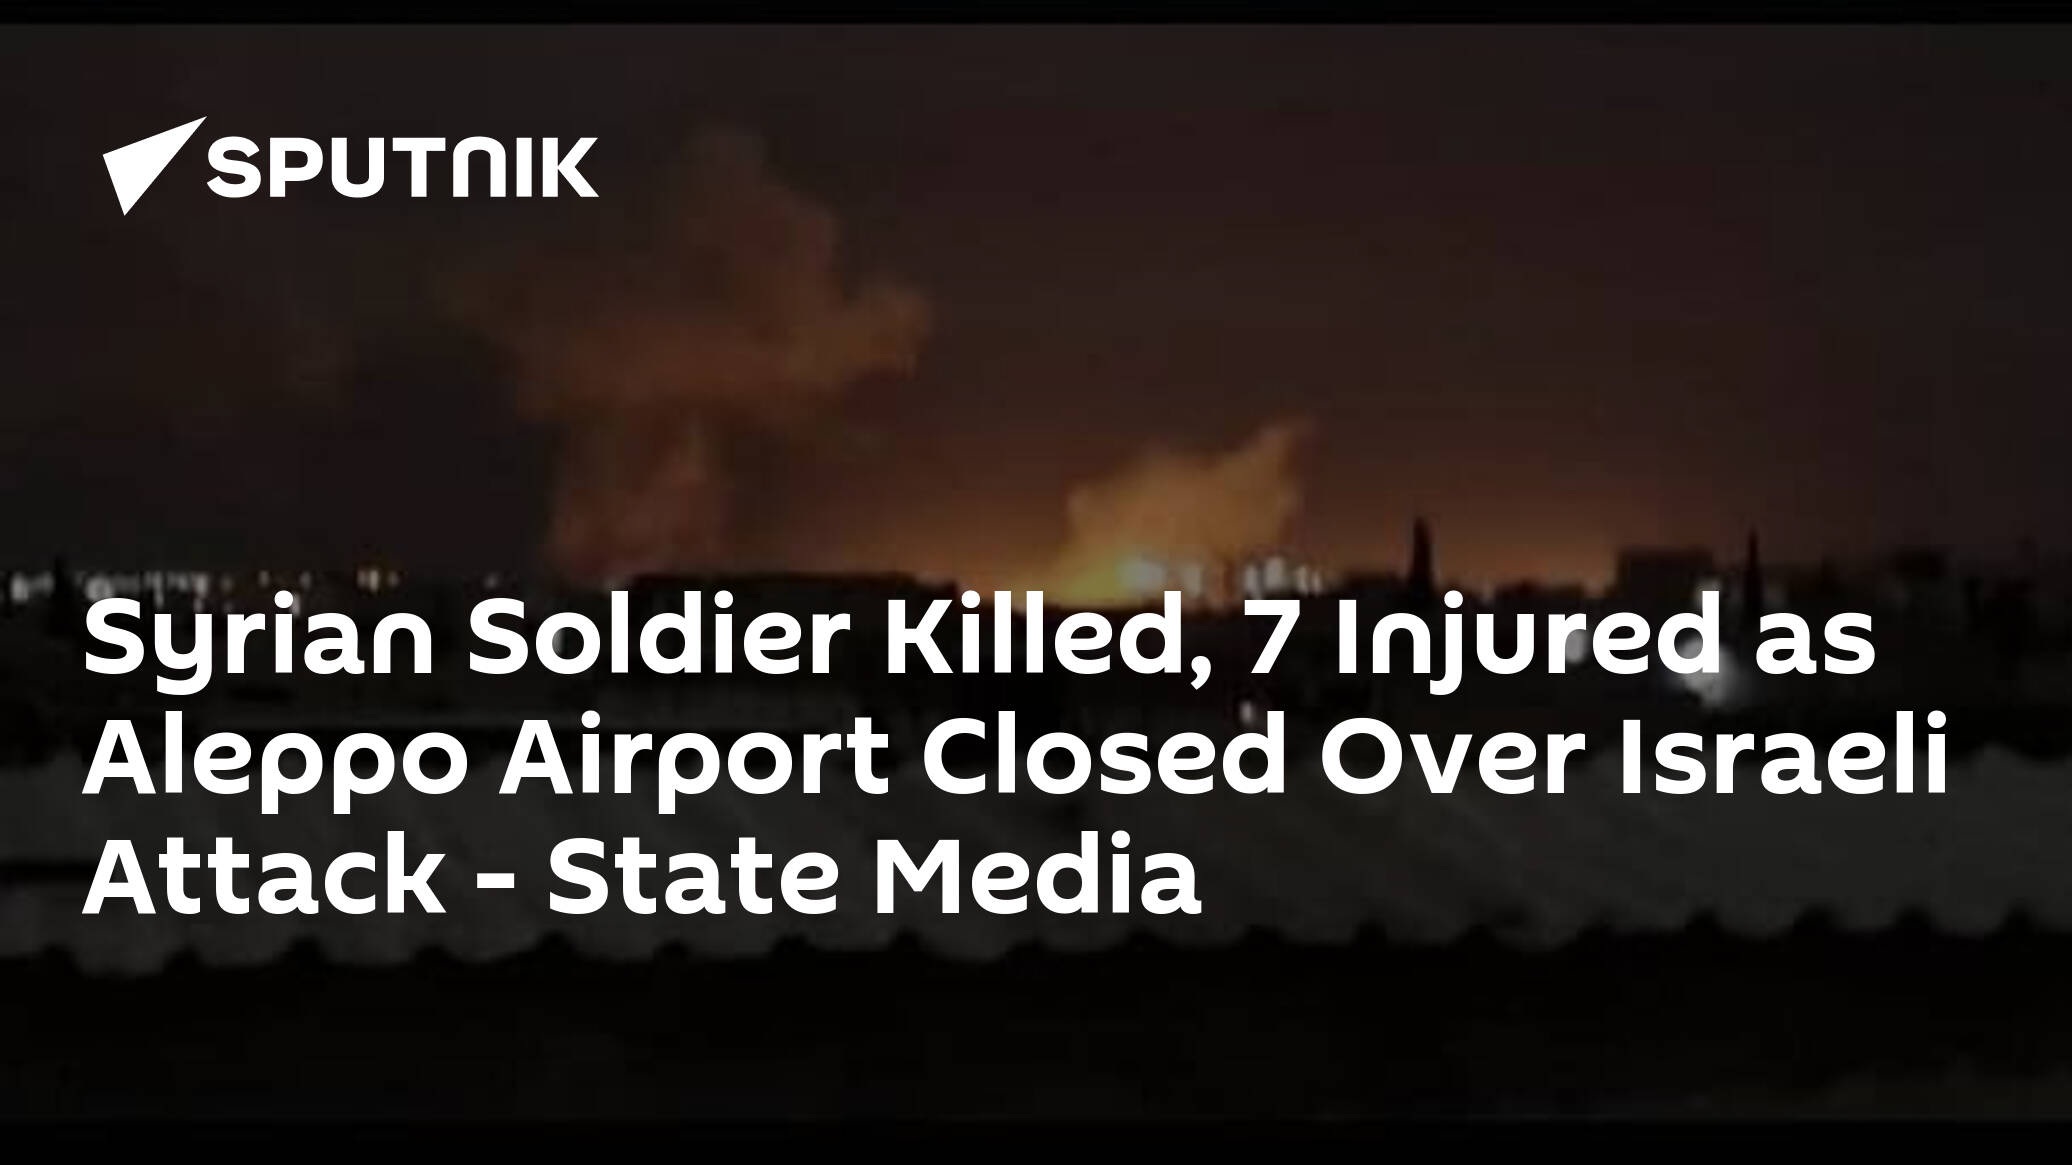 Syrian Soldier Killed, 7 Injured as Aleppo Airport Closed Over Israeli Attack – State Media